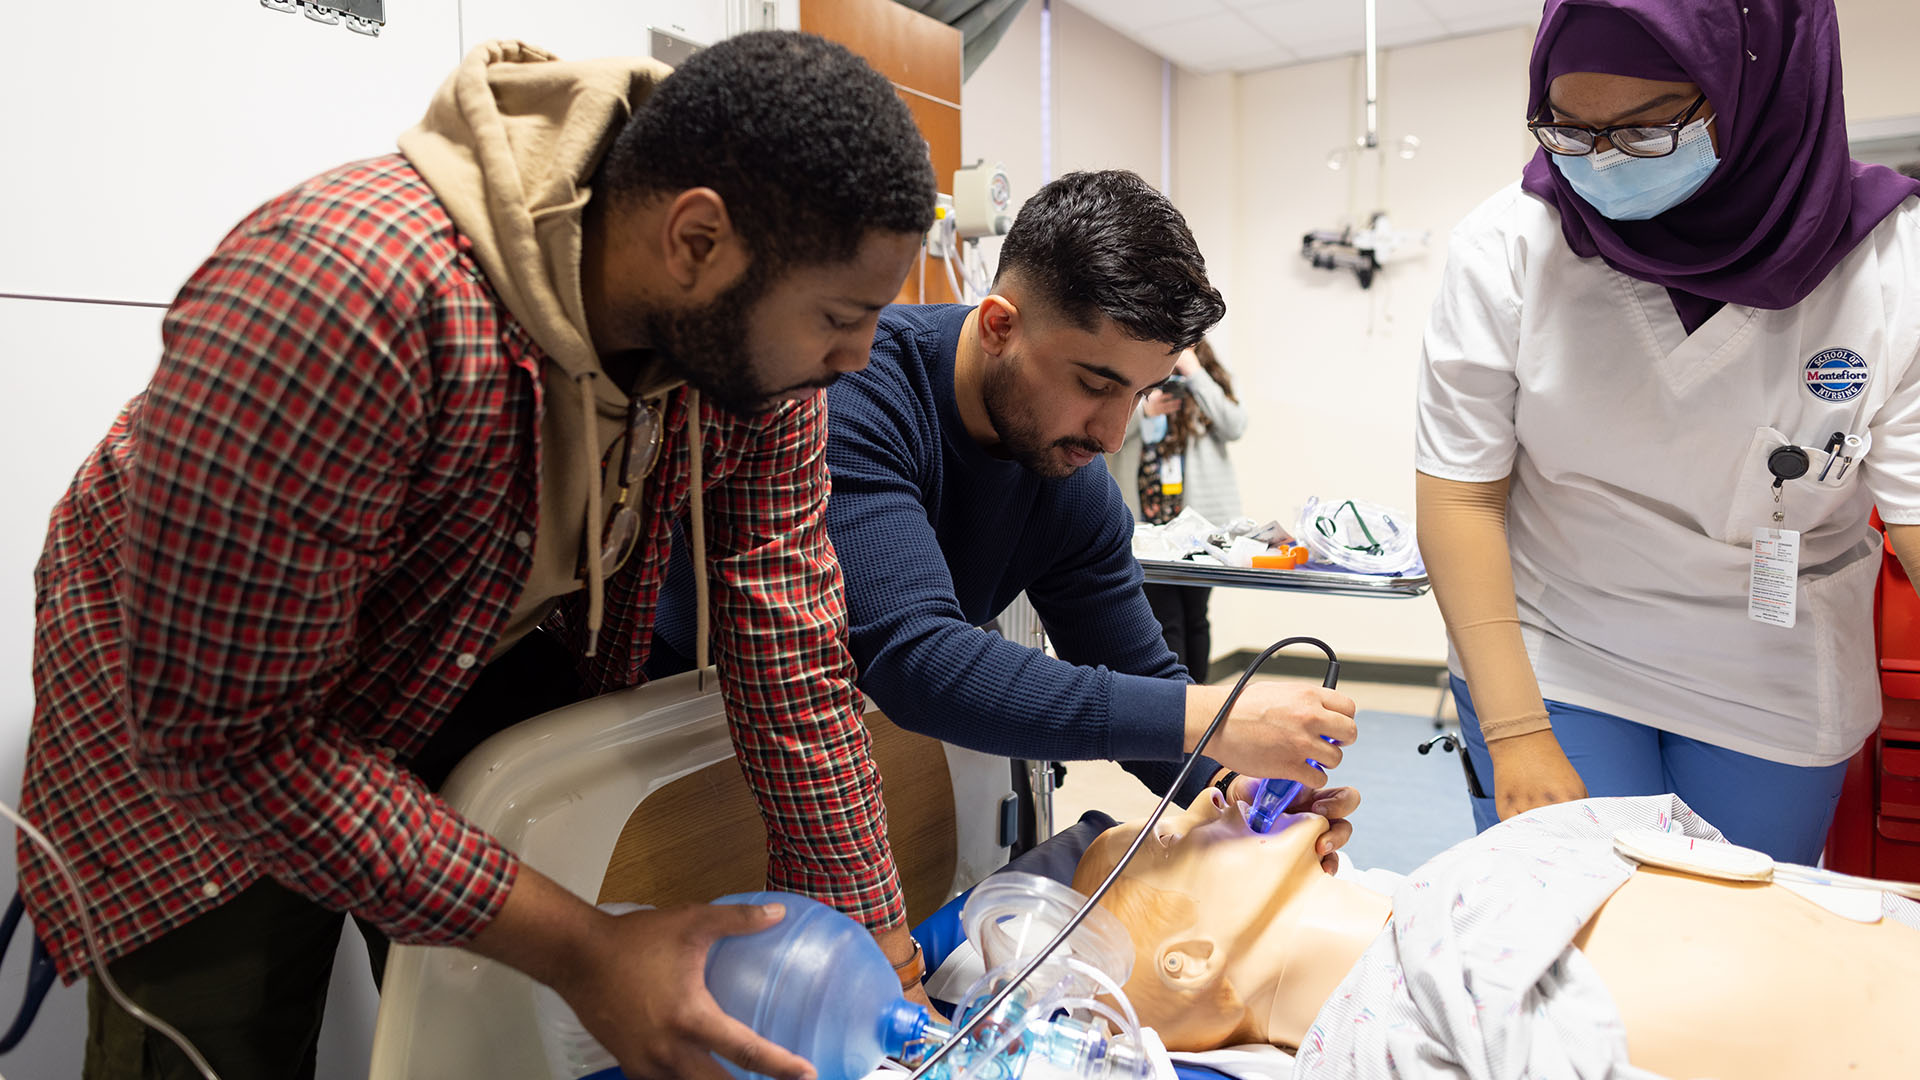 From Students to Physicians: New Course Prepares Students for Hospital Roles